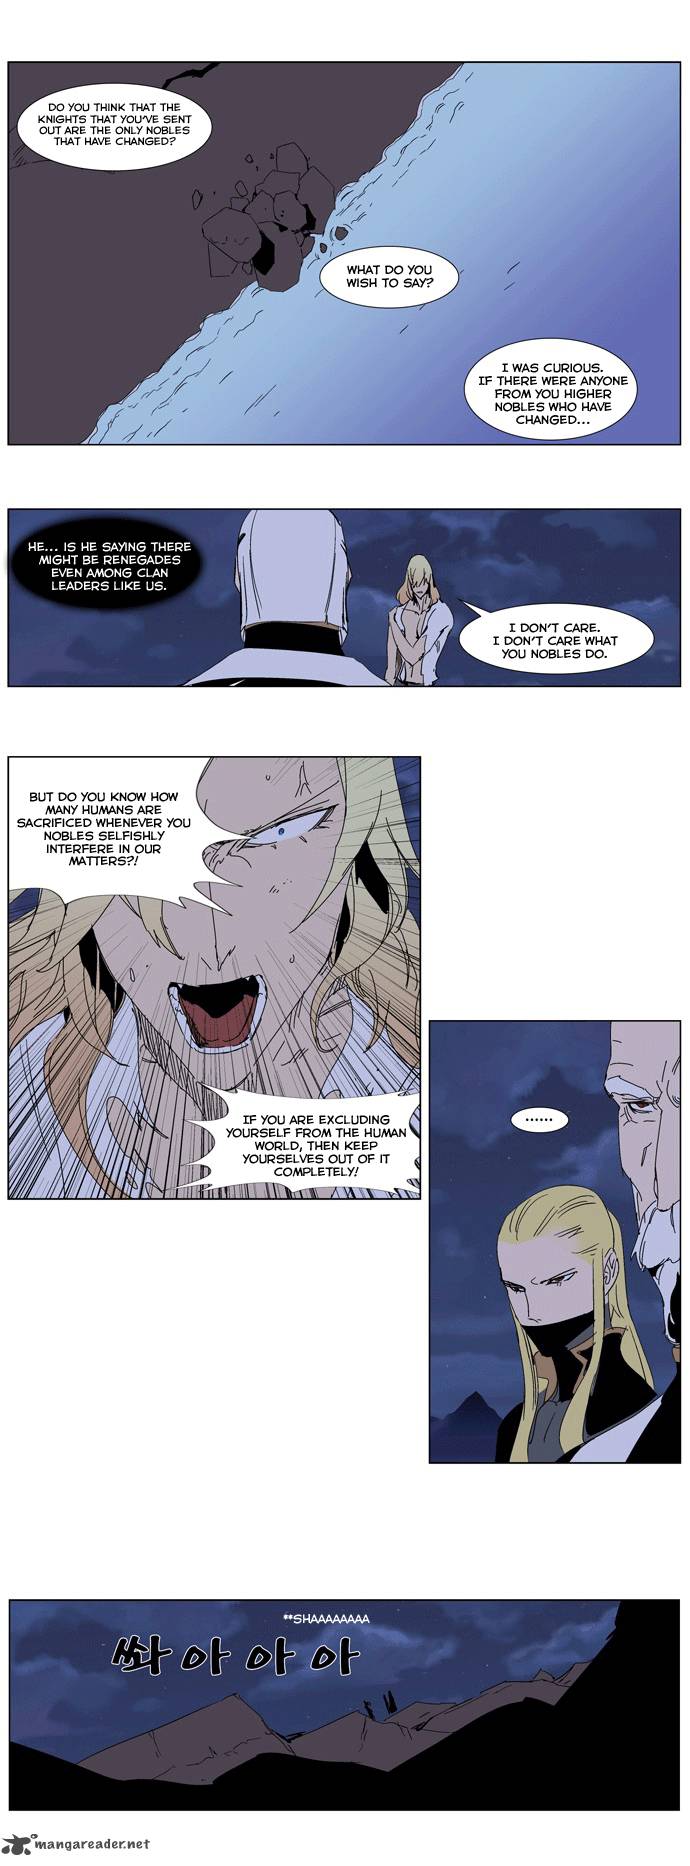 Noblesse 243 14